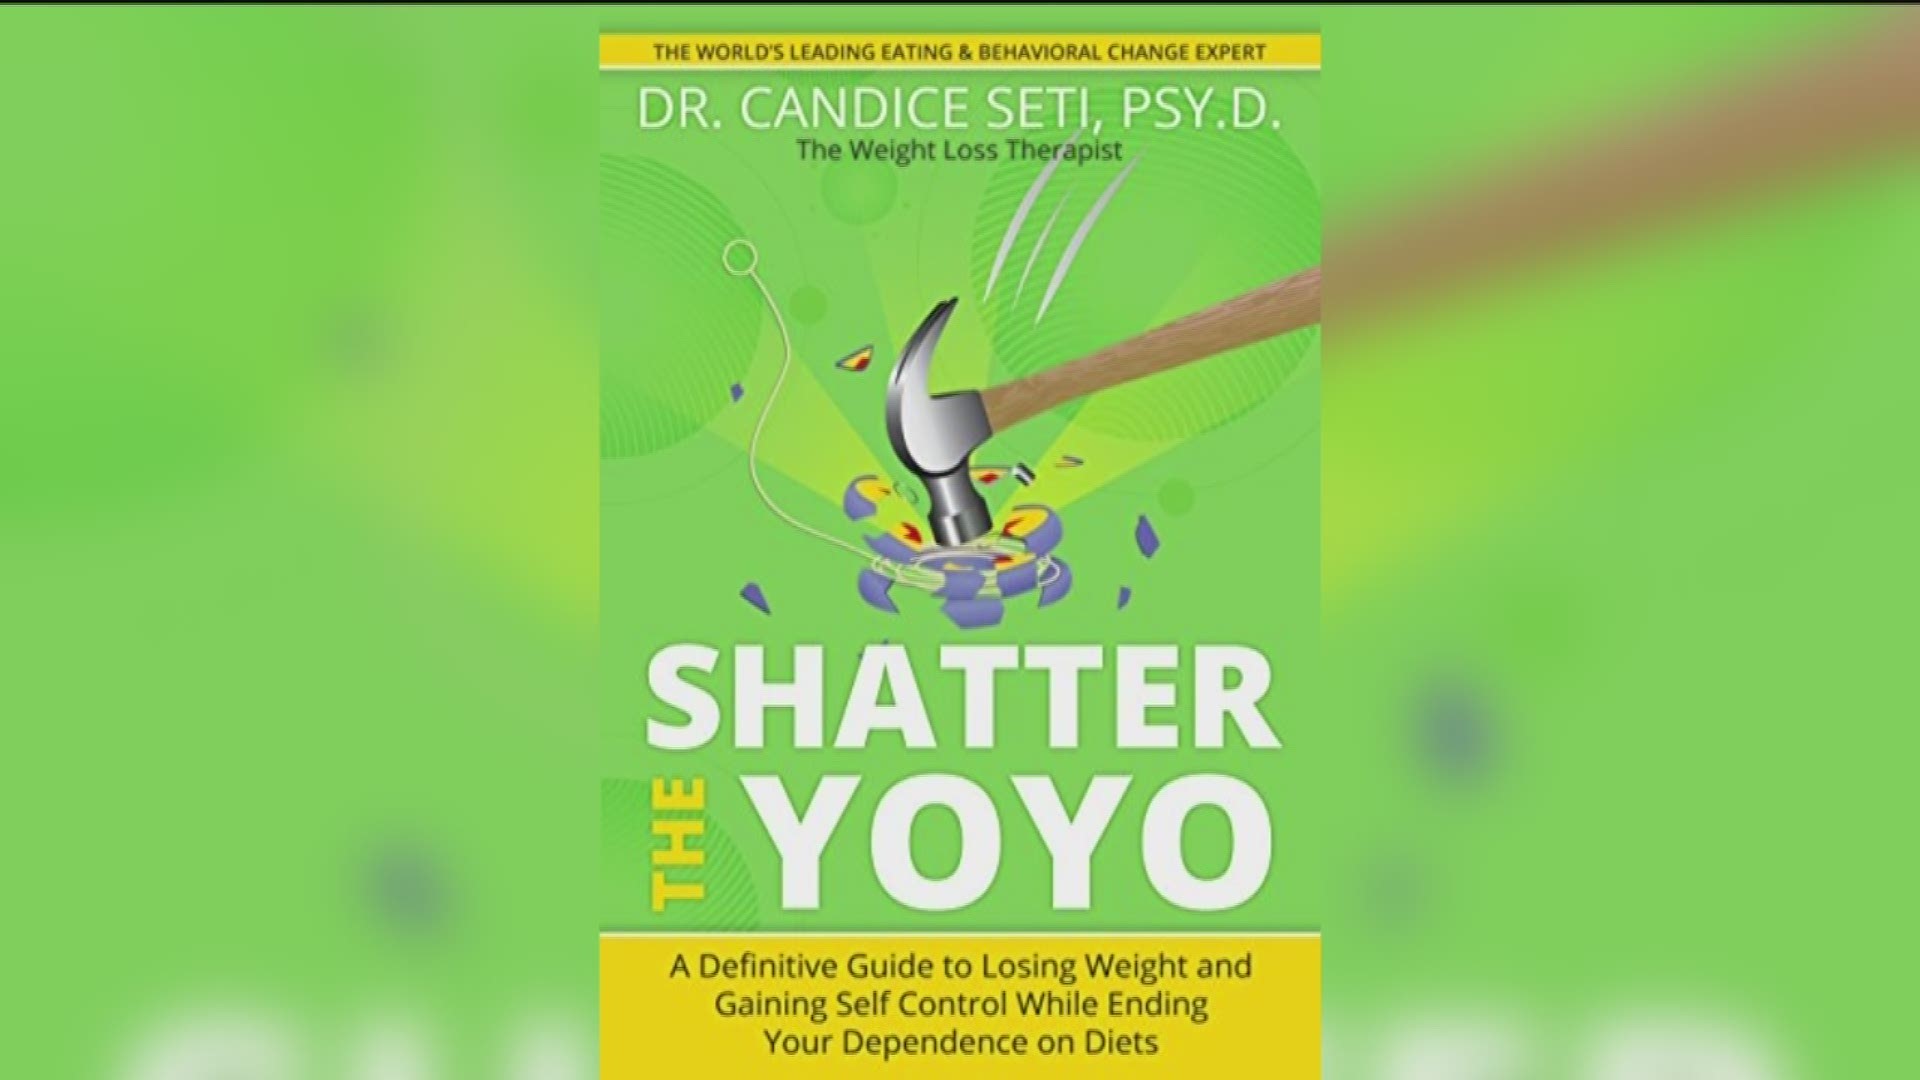 Dr. Candice Seti was sick and tired of yo-yo dieting so she peeled back the layers to find out why people keep going back to them